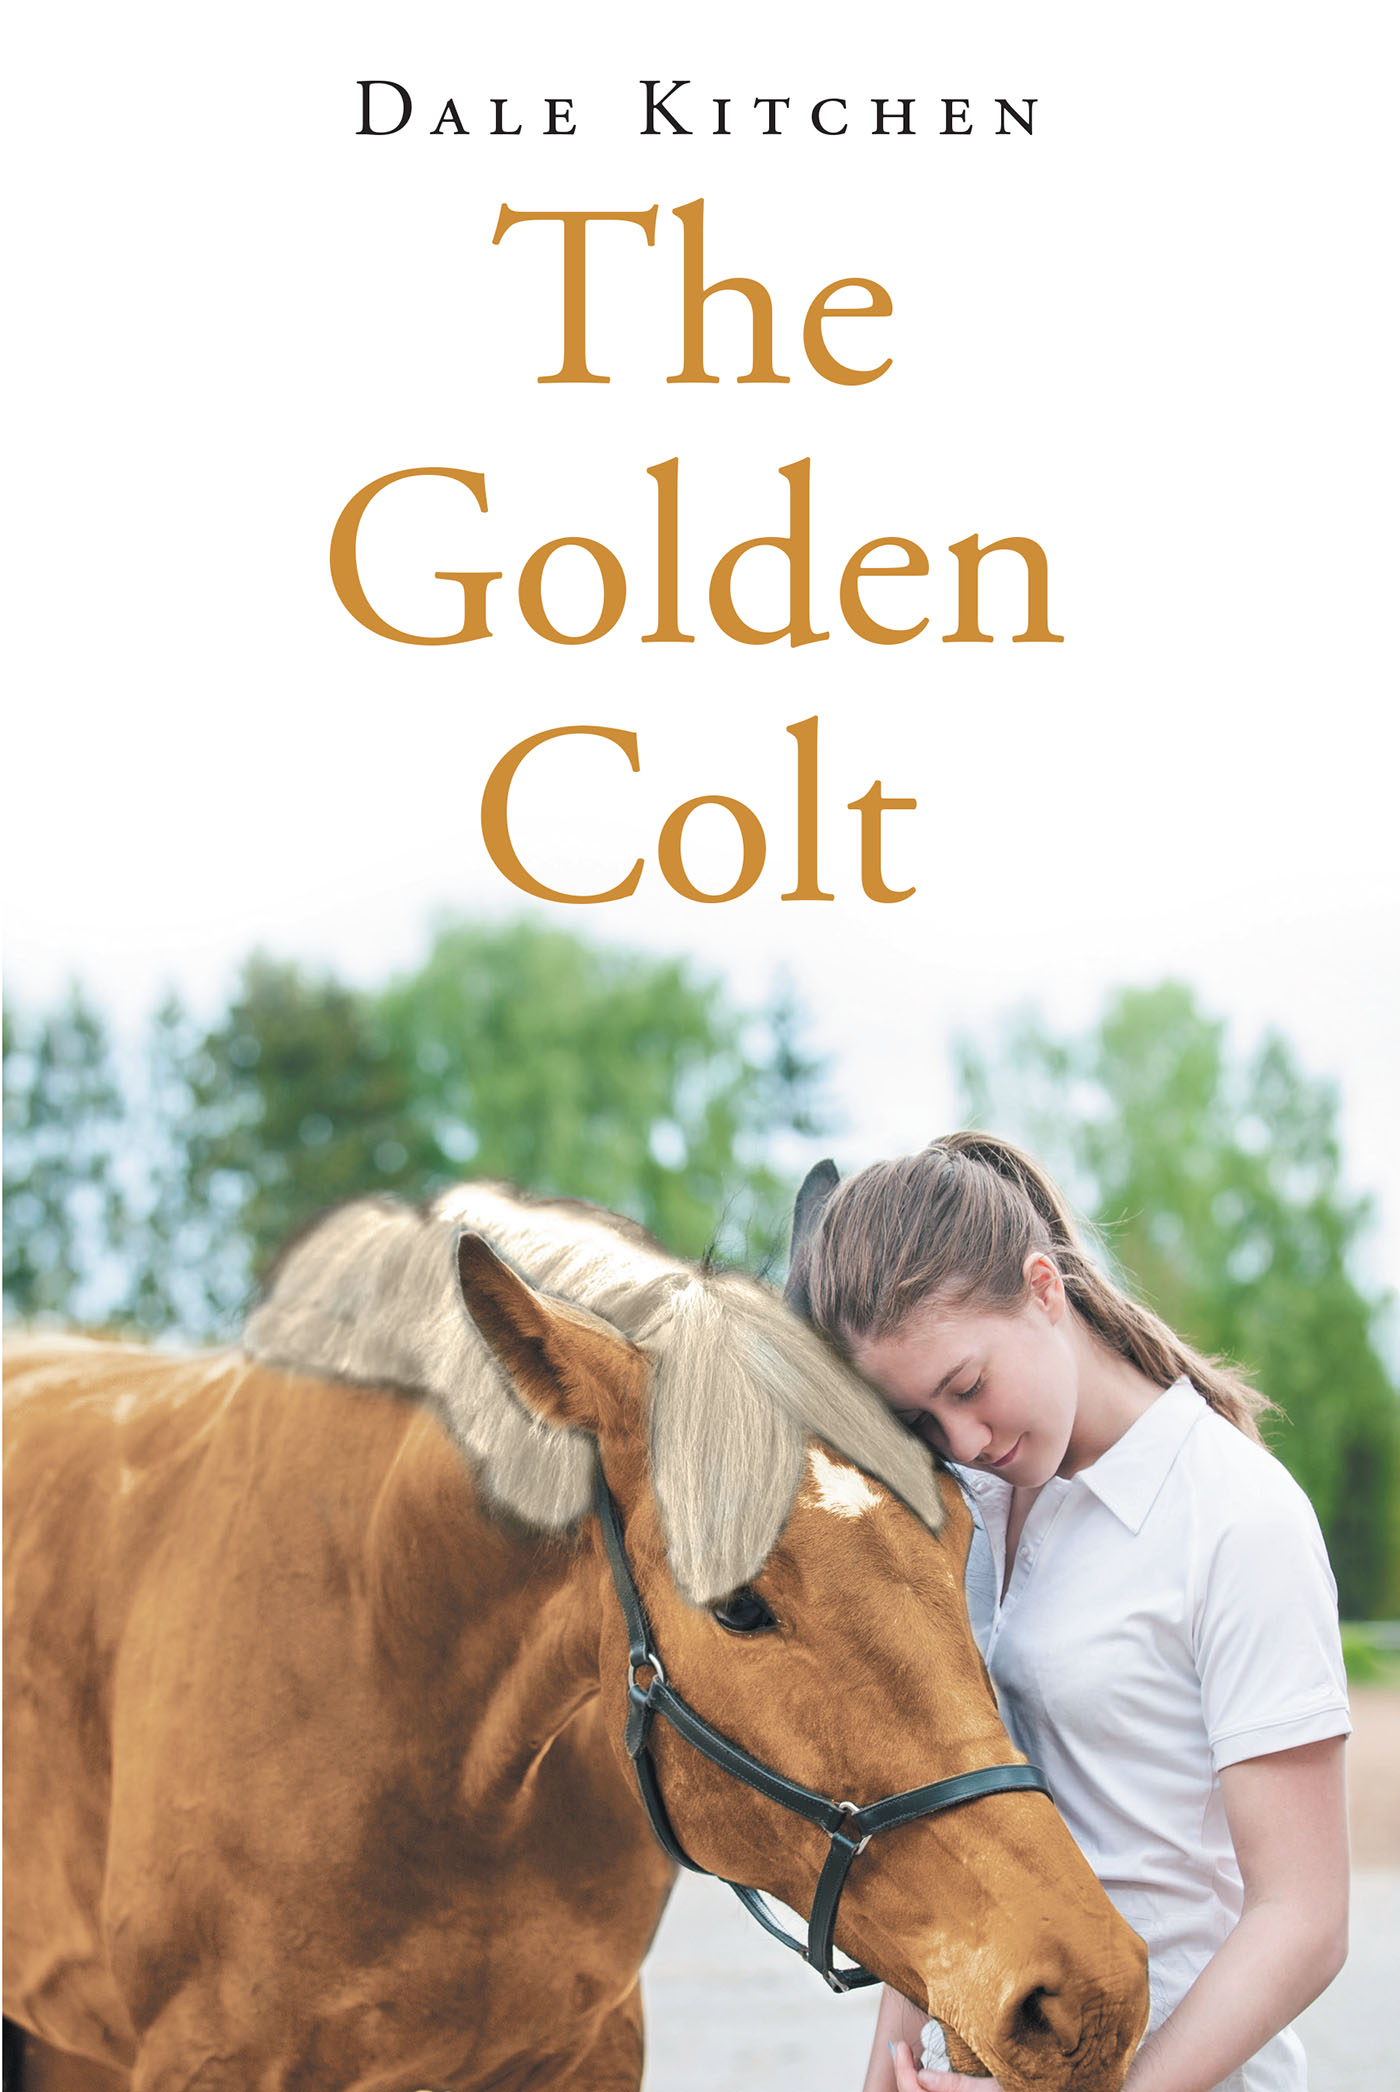 Author Dale Kitchen’s New Book "the Golden Colt" is an Uplifting Story of New Beginnings as an Exceptional Horse Touches the Lives of Those Who Need Him Most